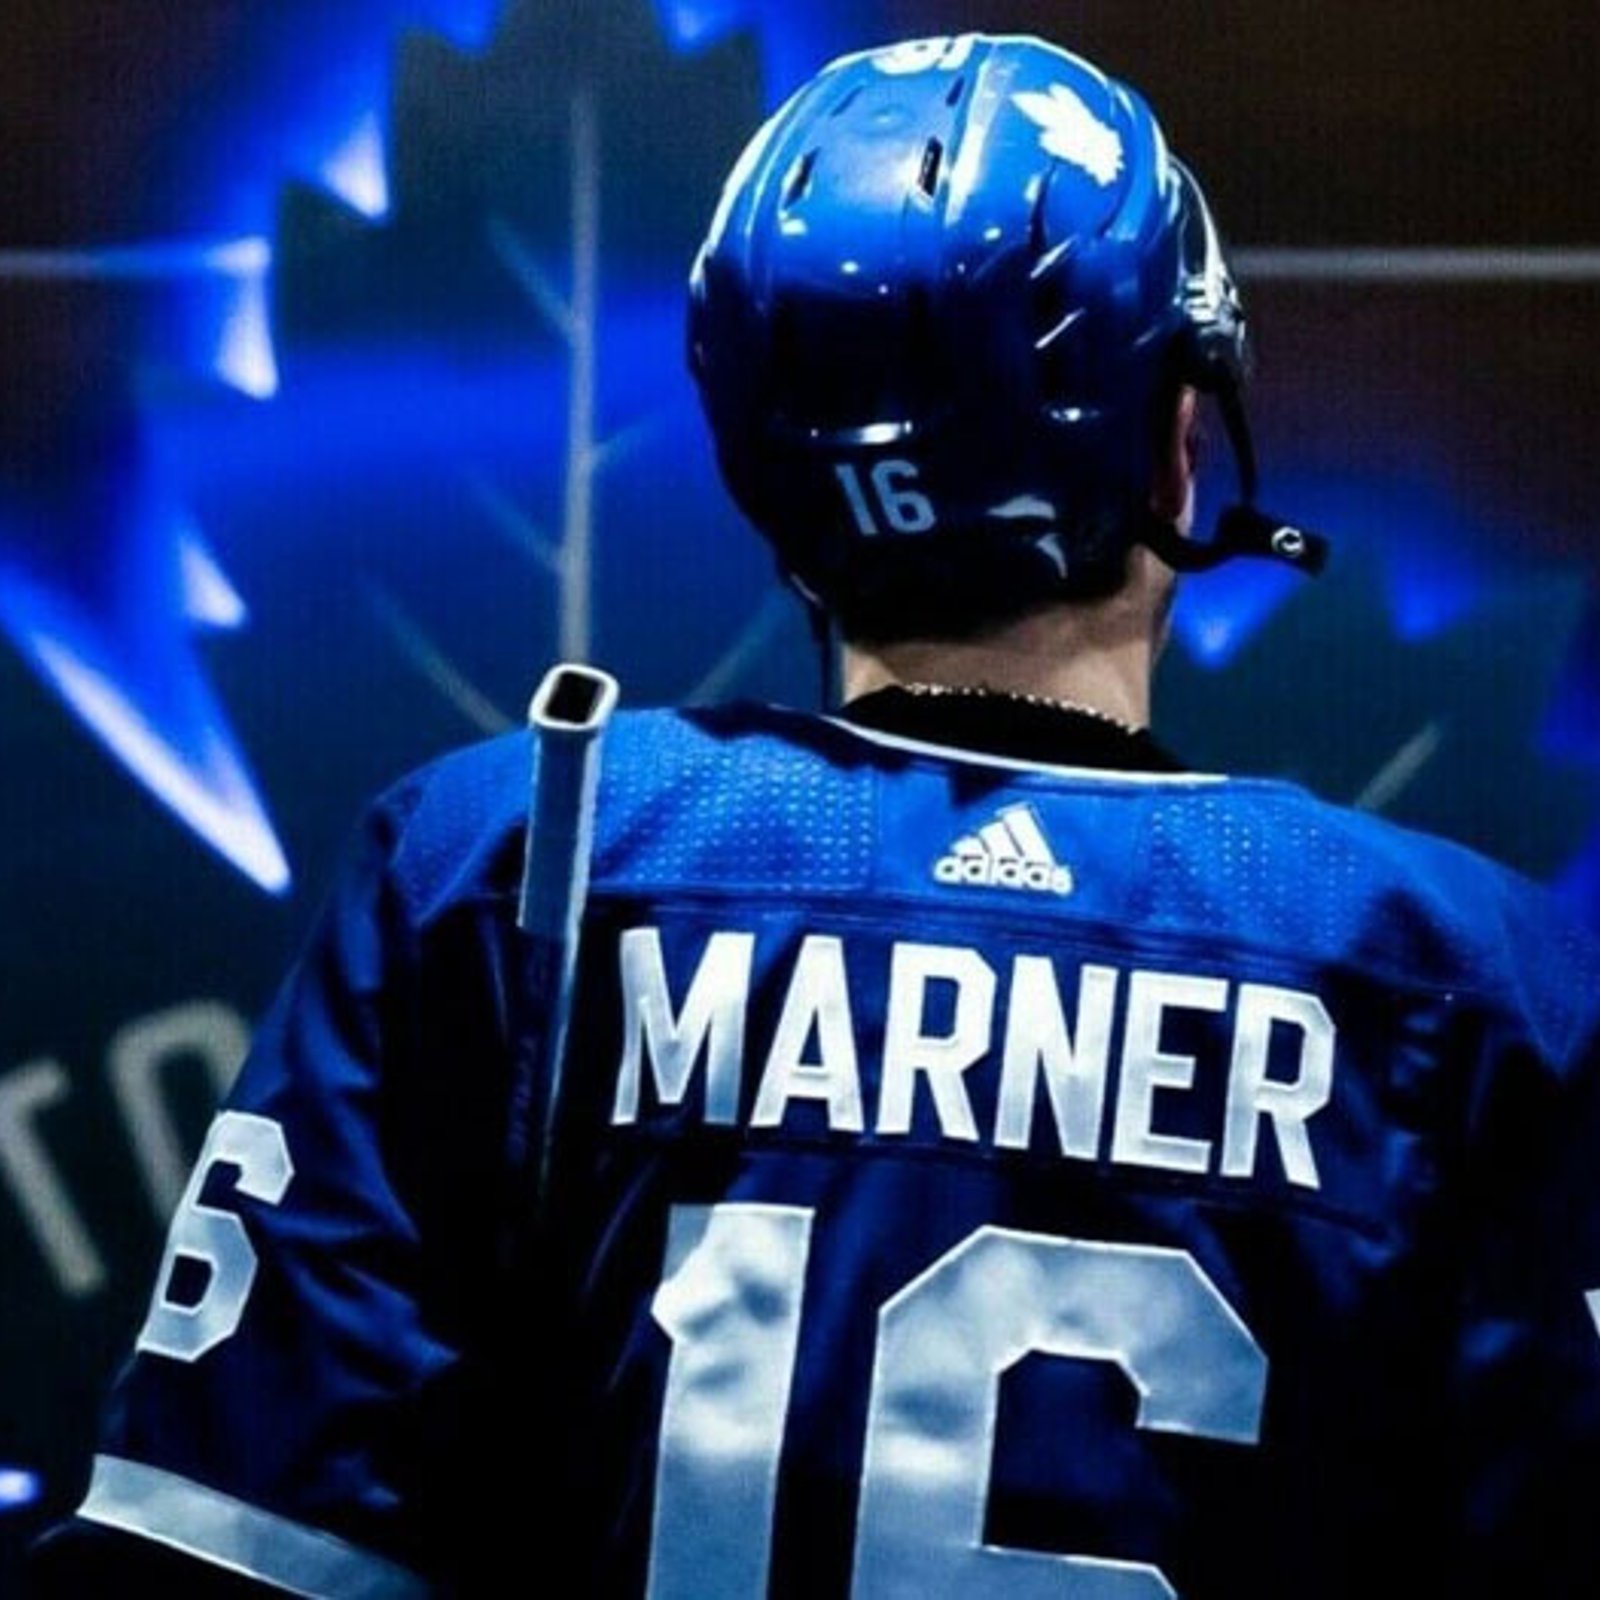 Rumor: Mitch Marner has submitted his 9 team trade list